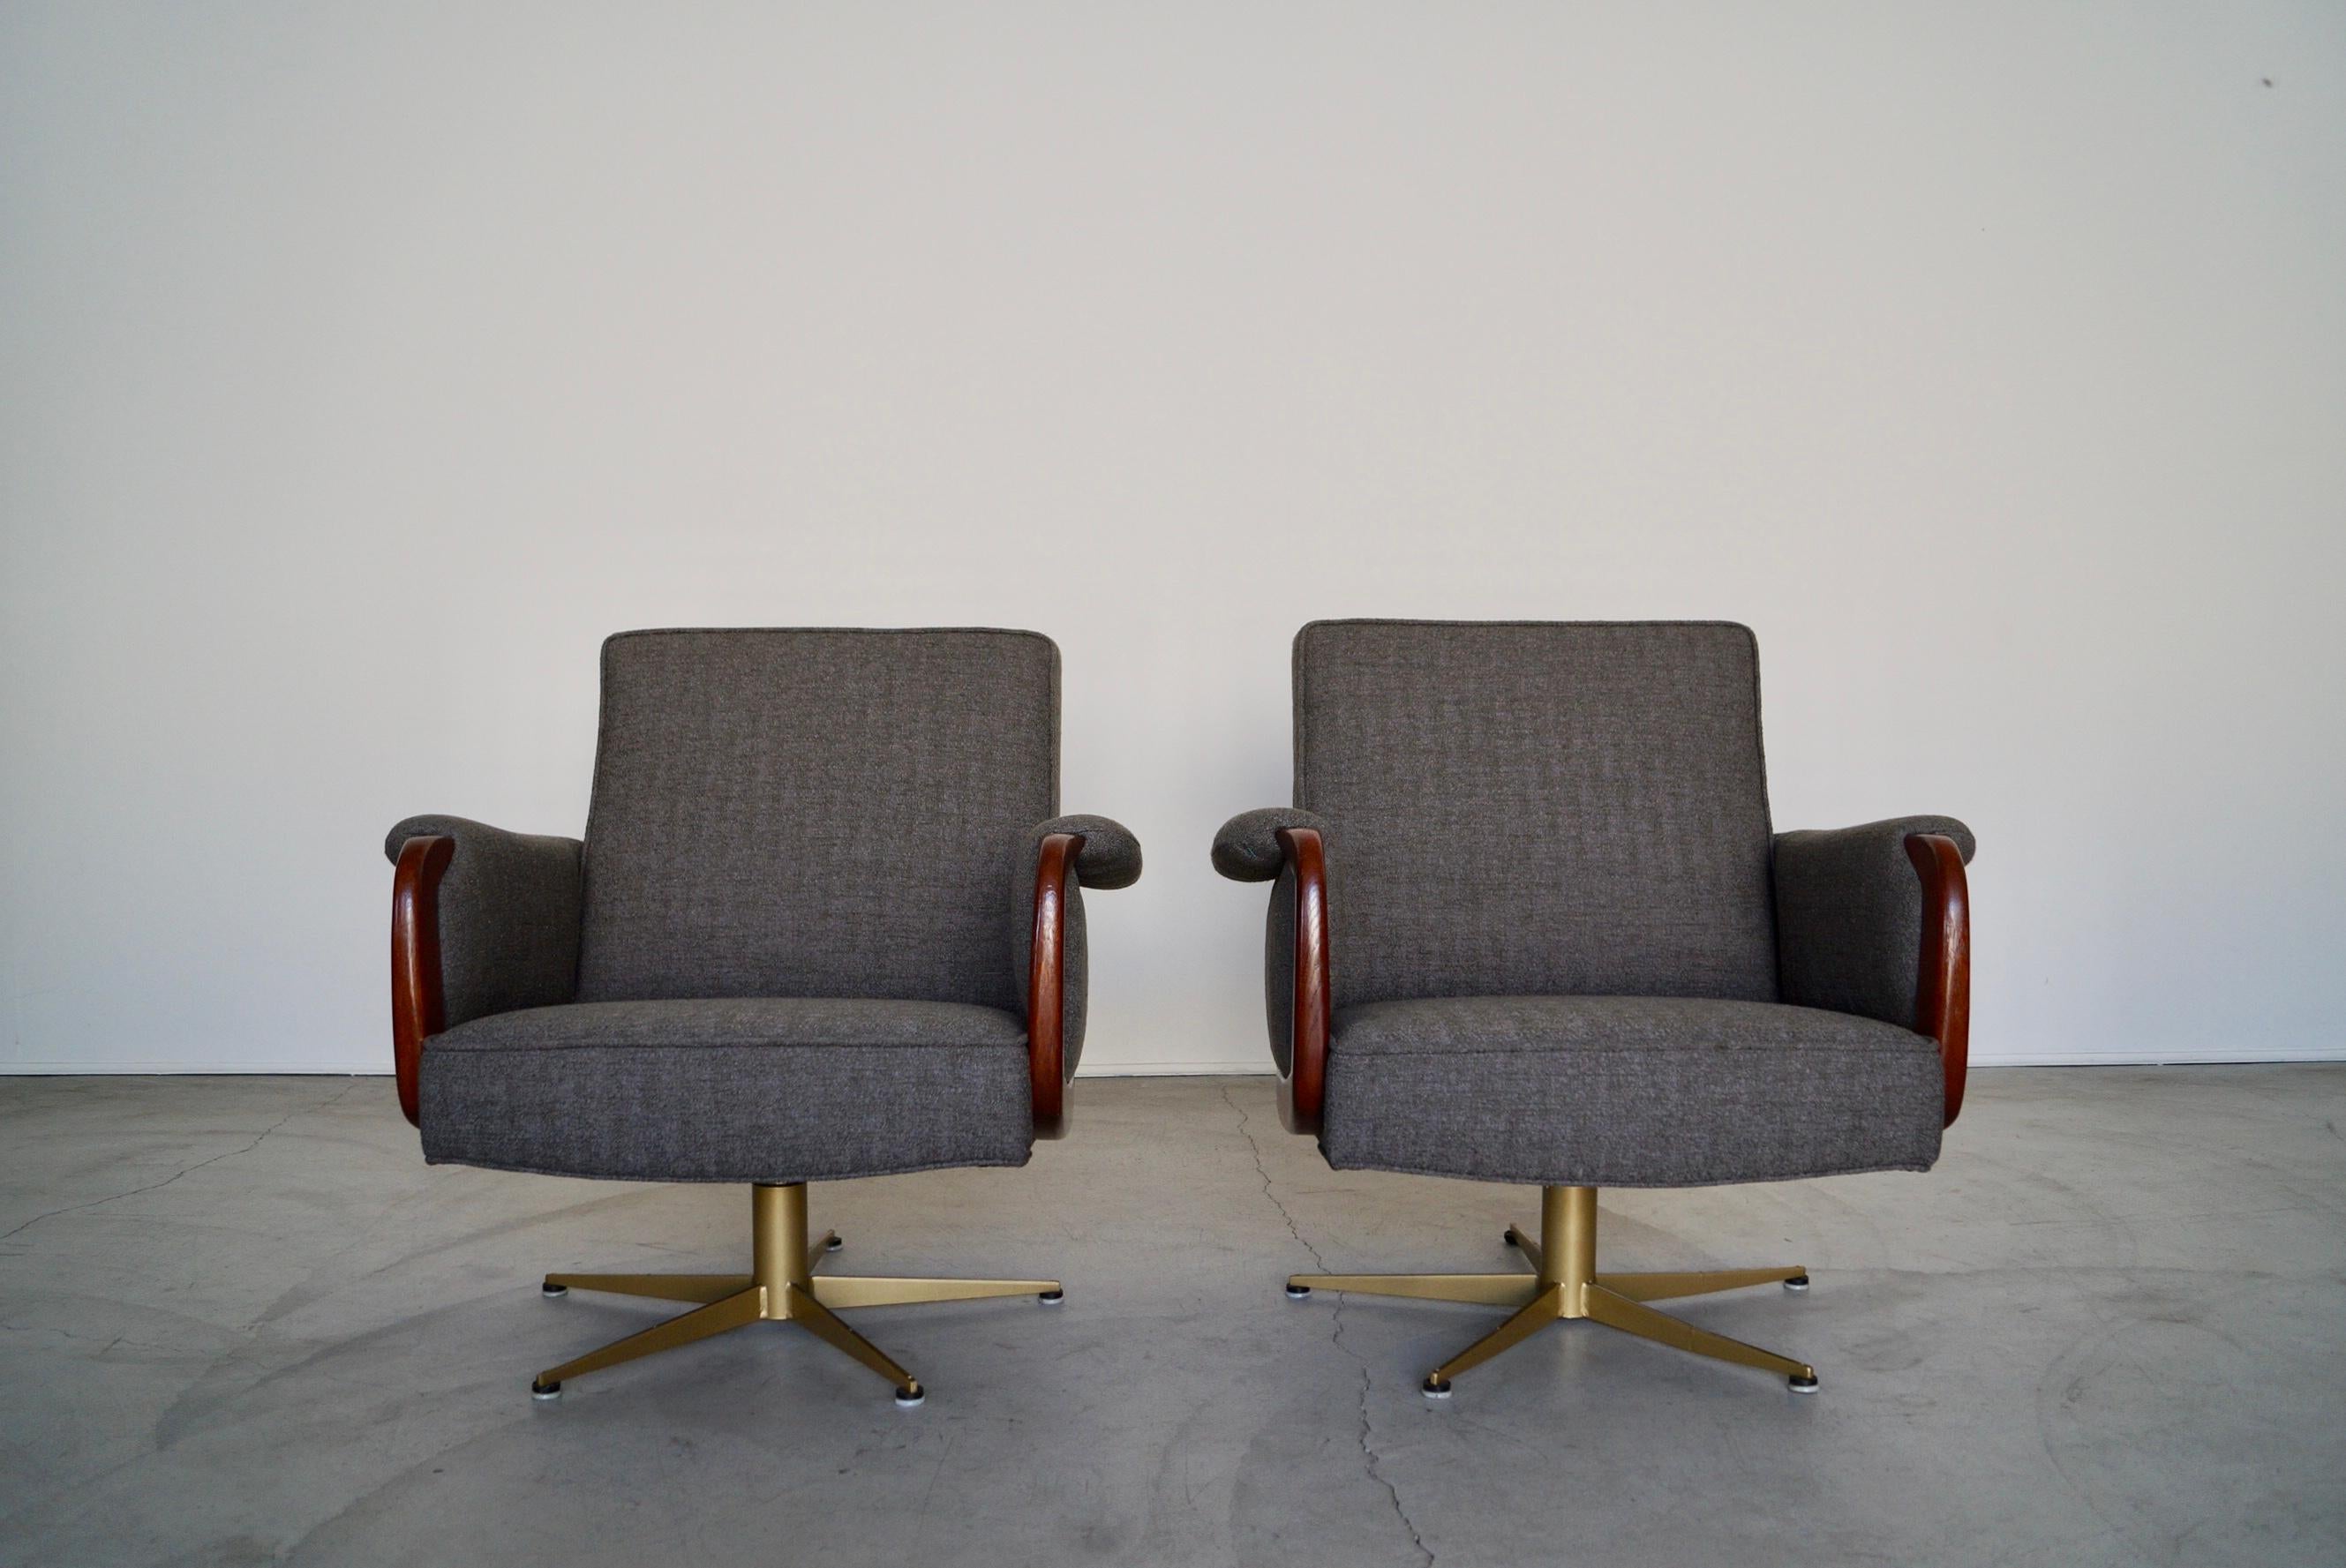 Danish 1970's Mid-Century Modern Swivel Lounge Chairs - a Pair For Sale